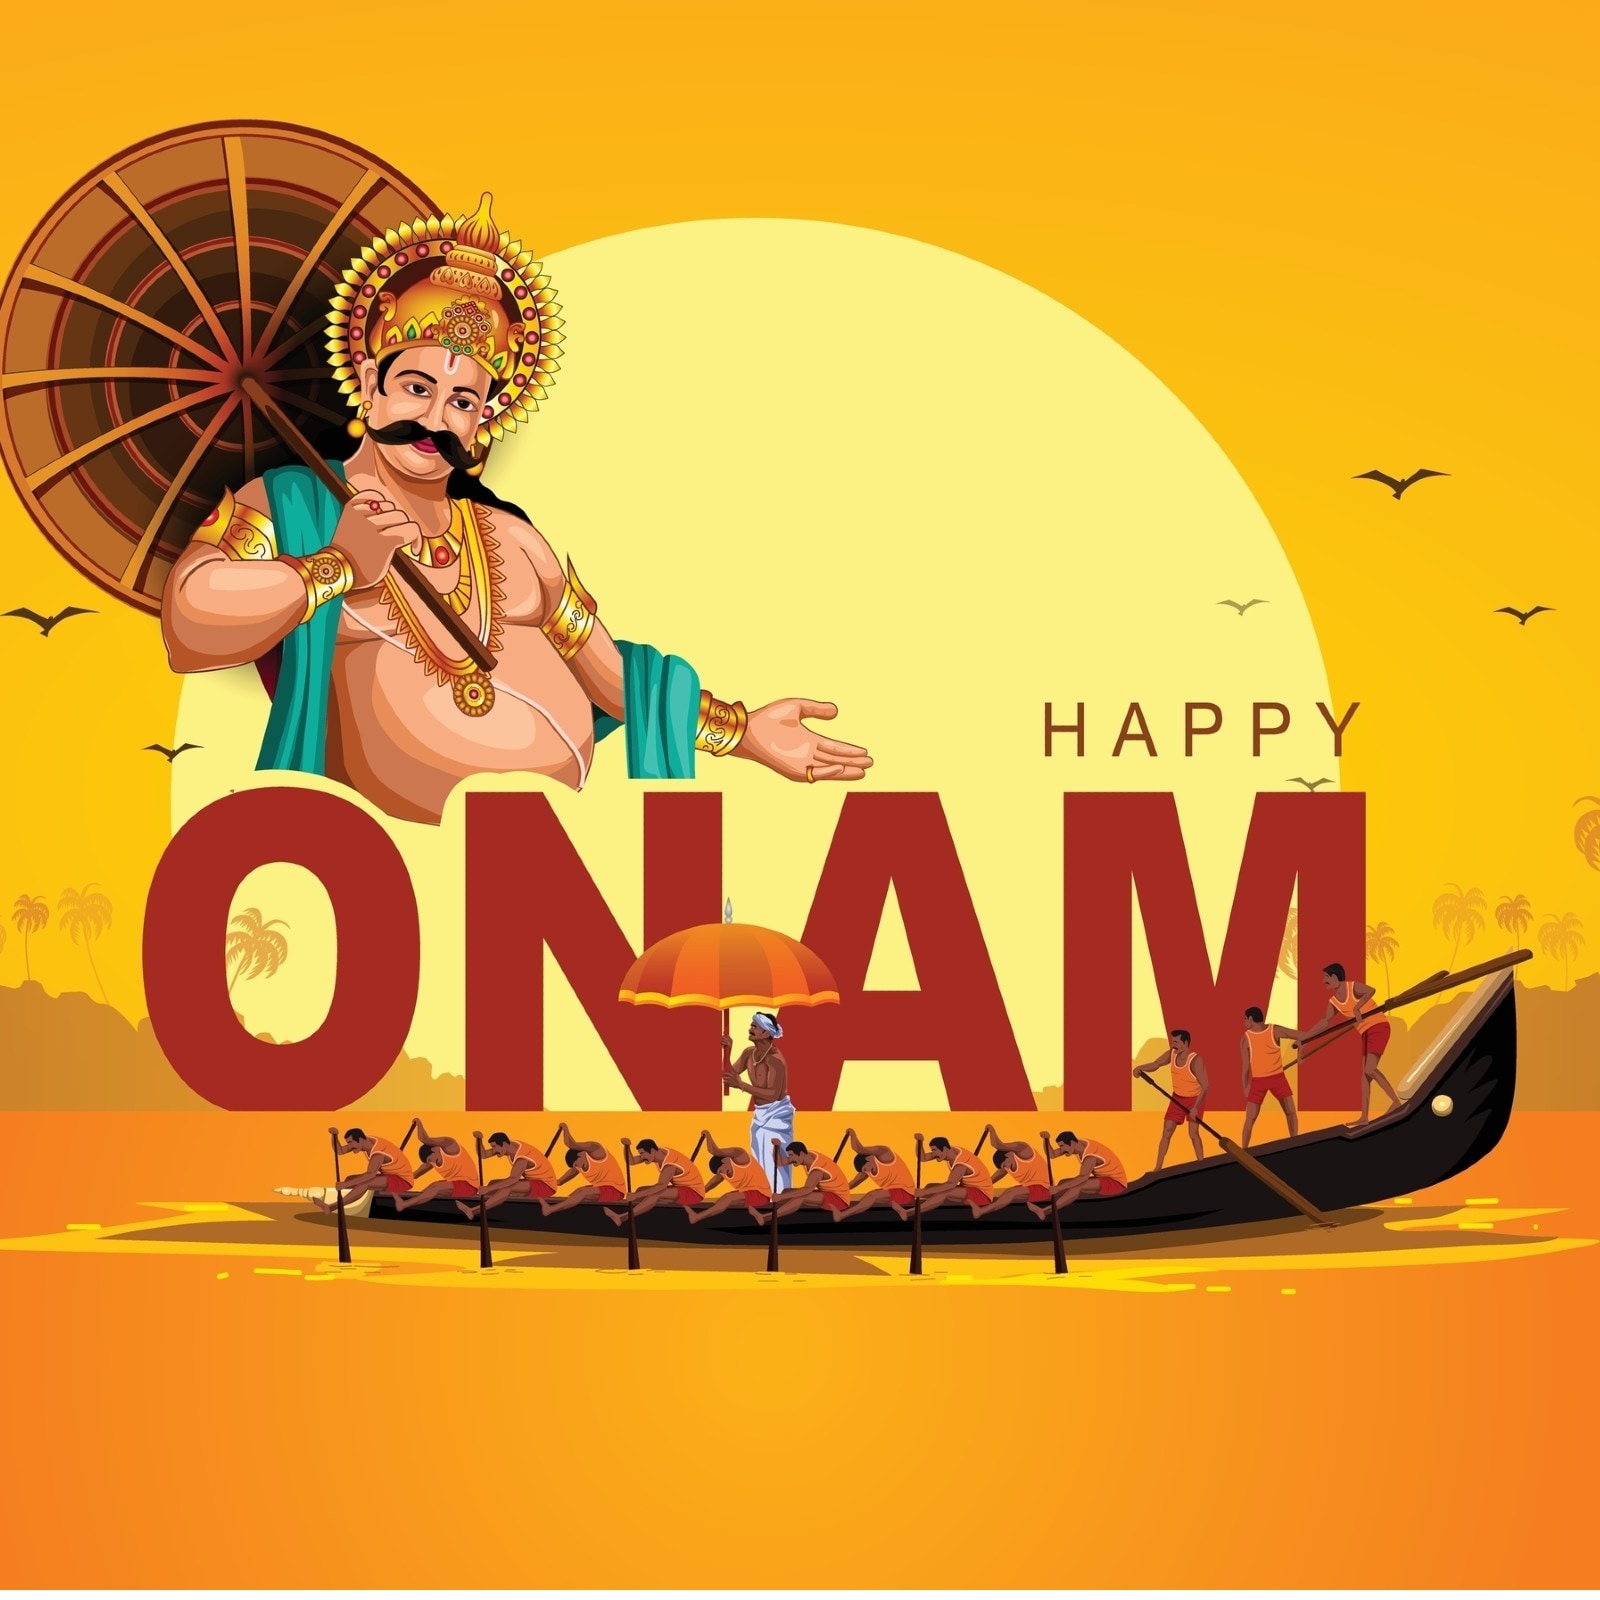 Ccelebration Background For Happy Onam Festival Of South India • Wall